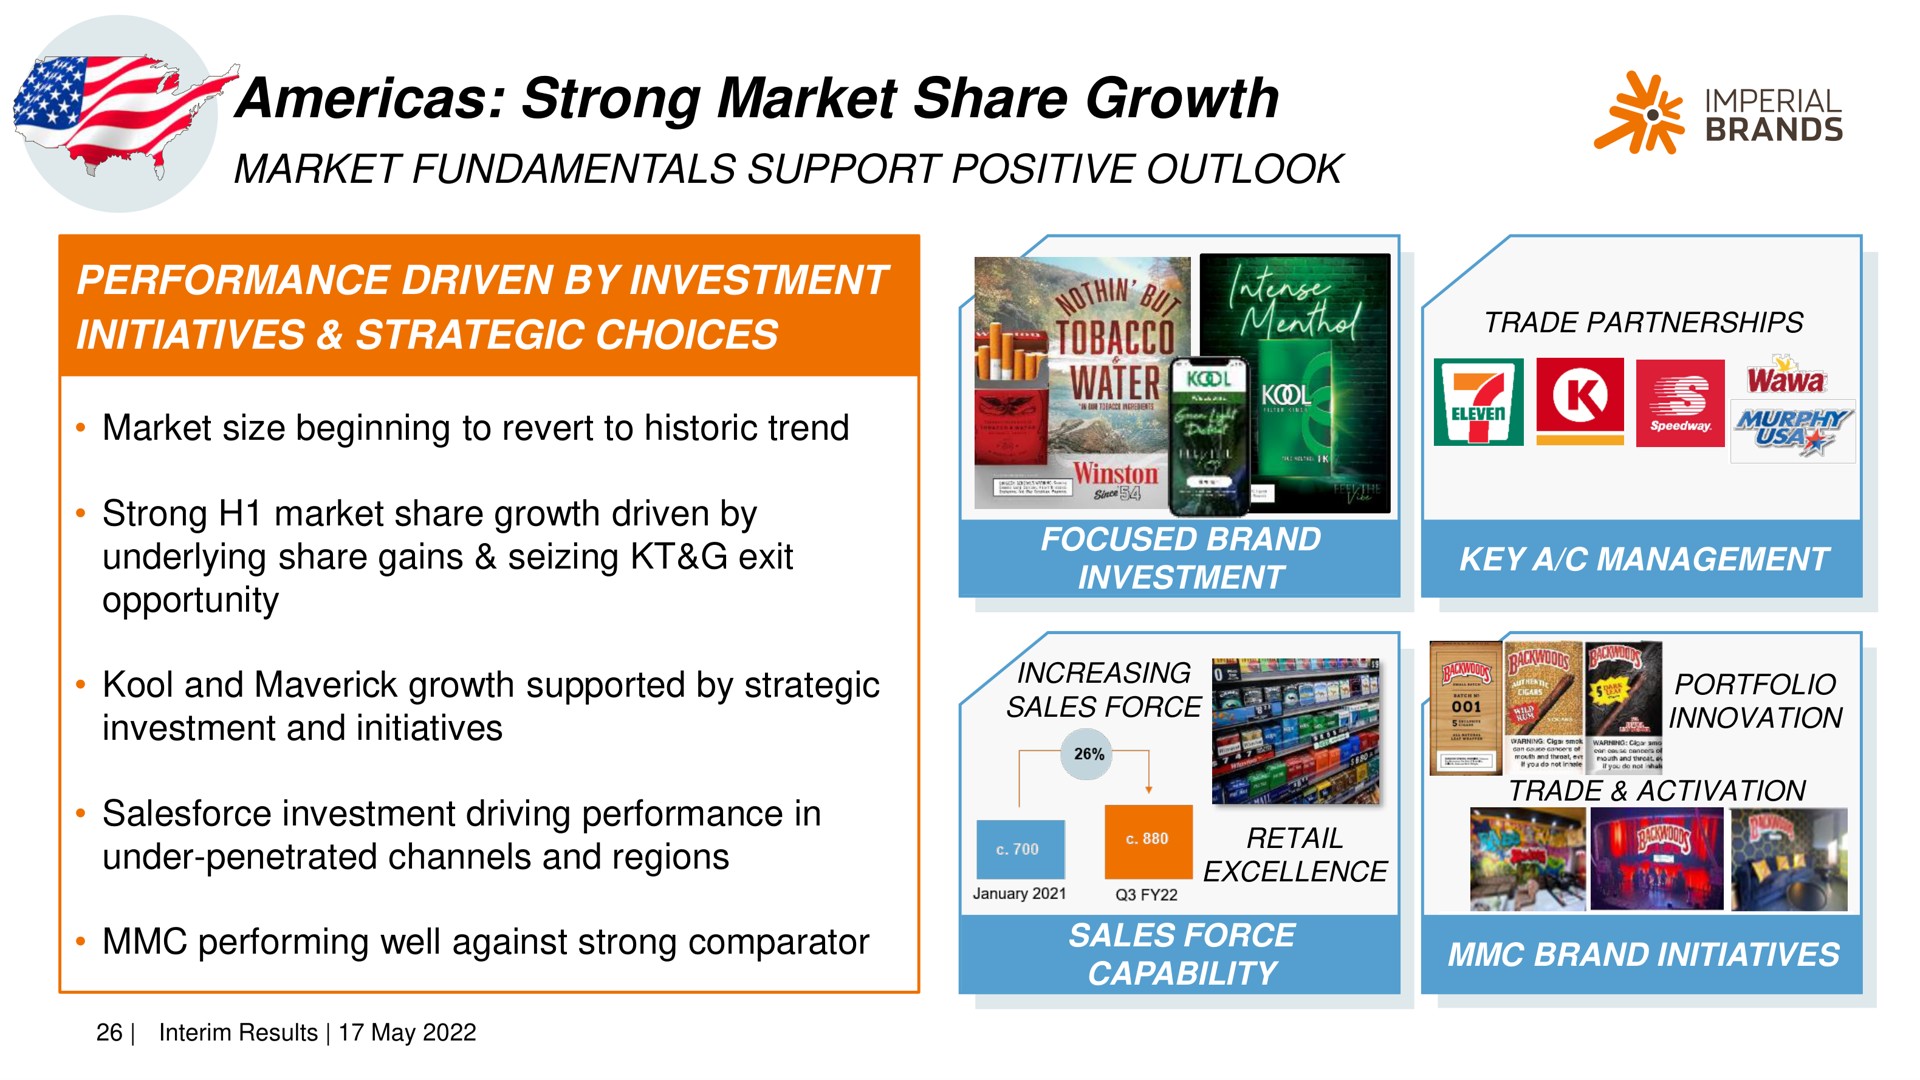 strong market share growth fundamentals support positive outlook me imperial | Imperial Brands